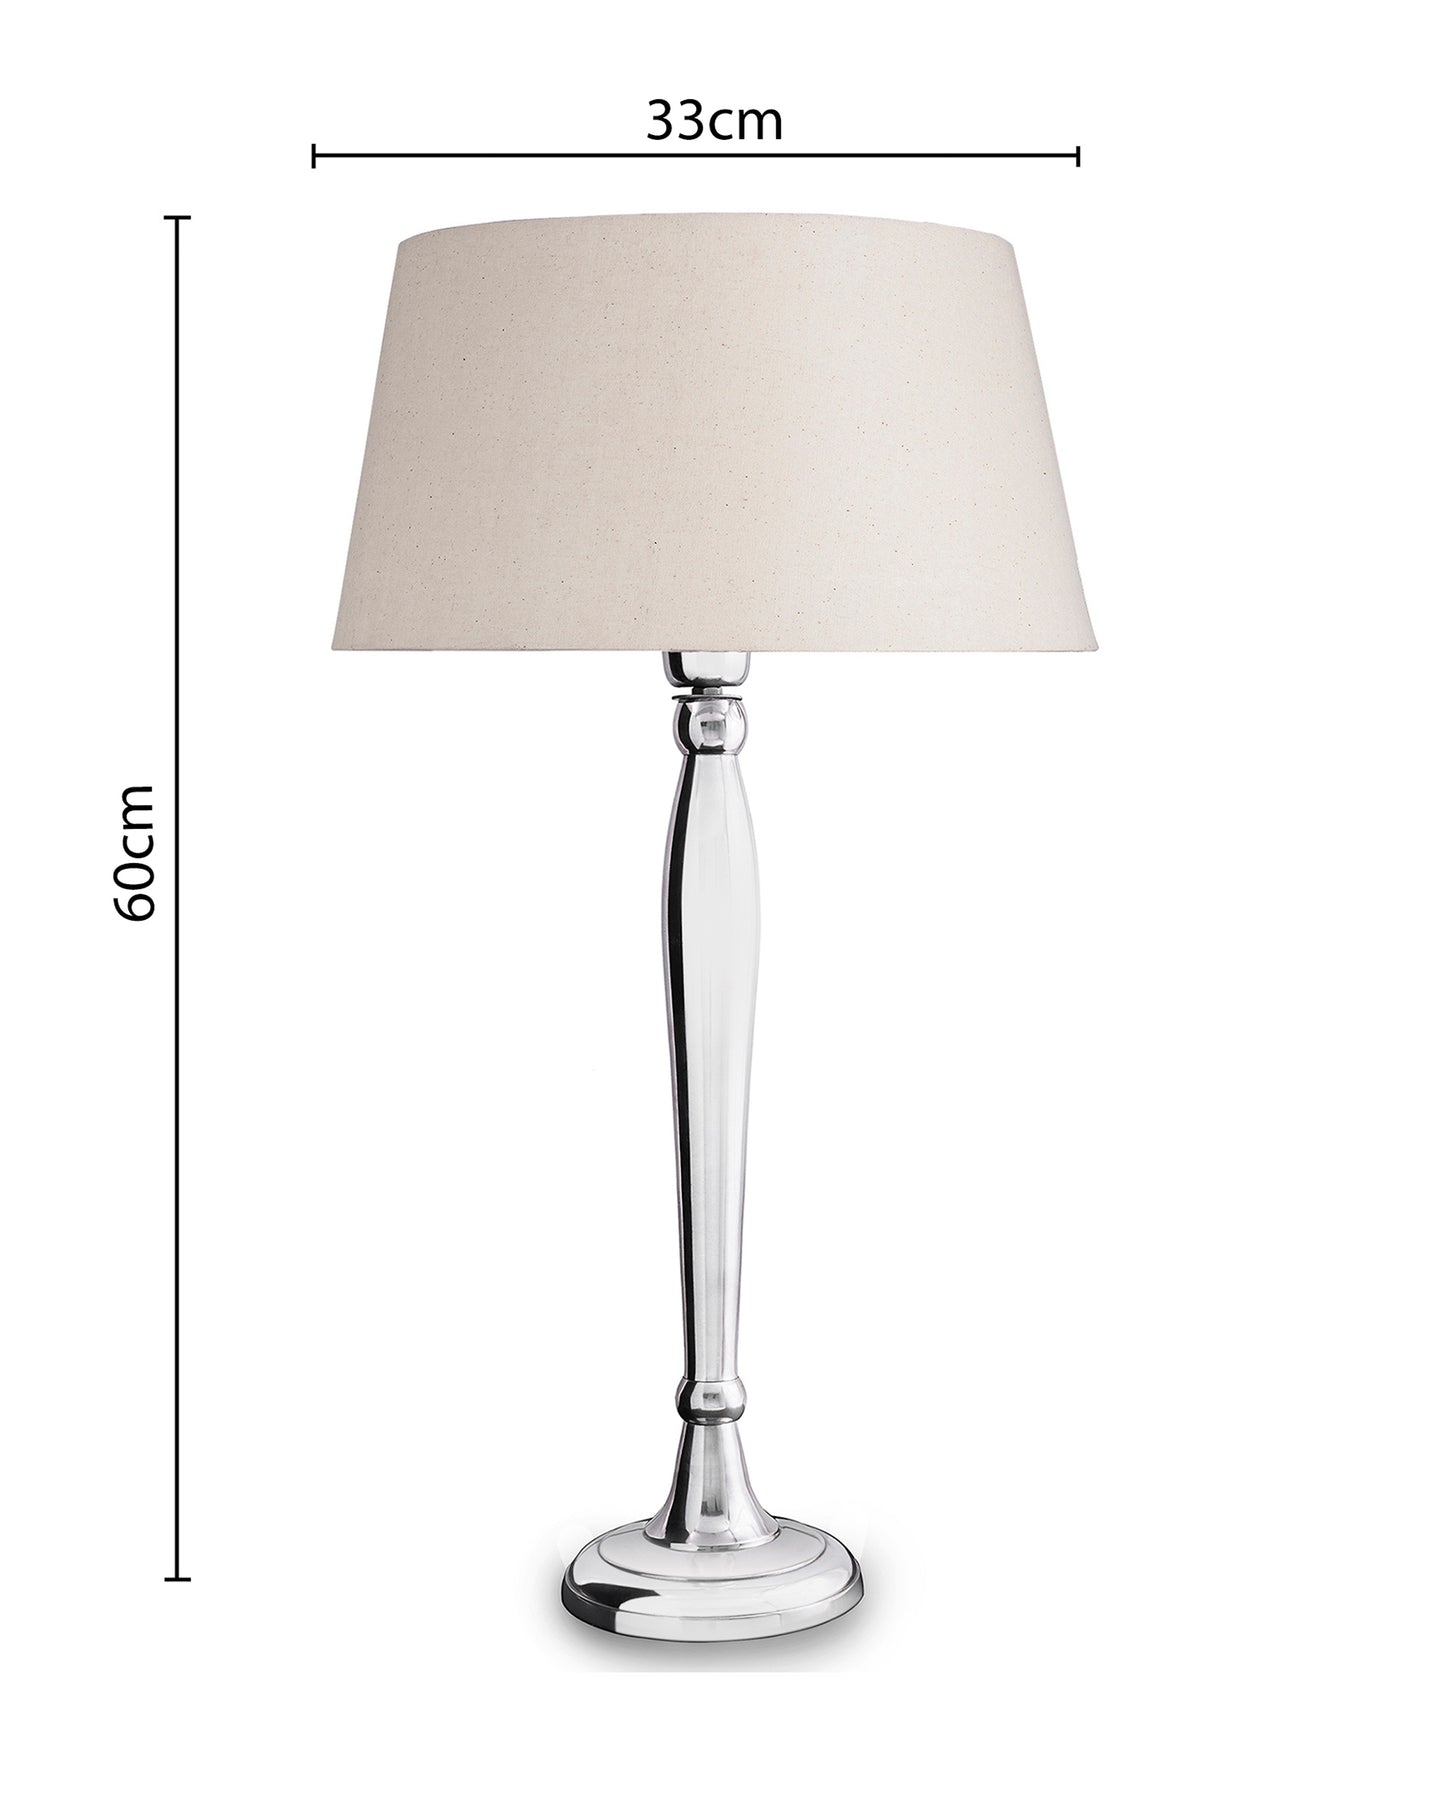 Royal Ovoid chrome lamp with shade